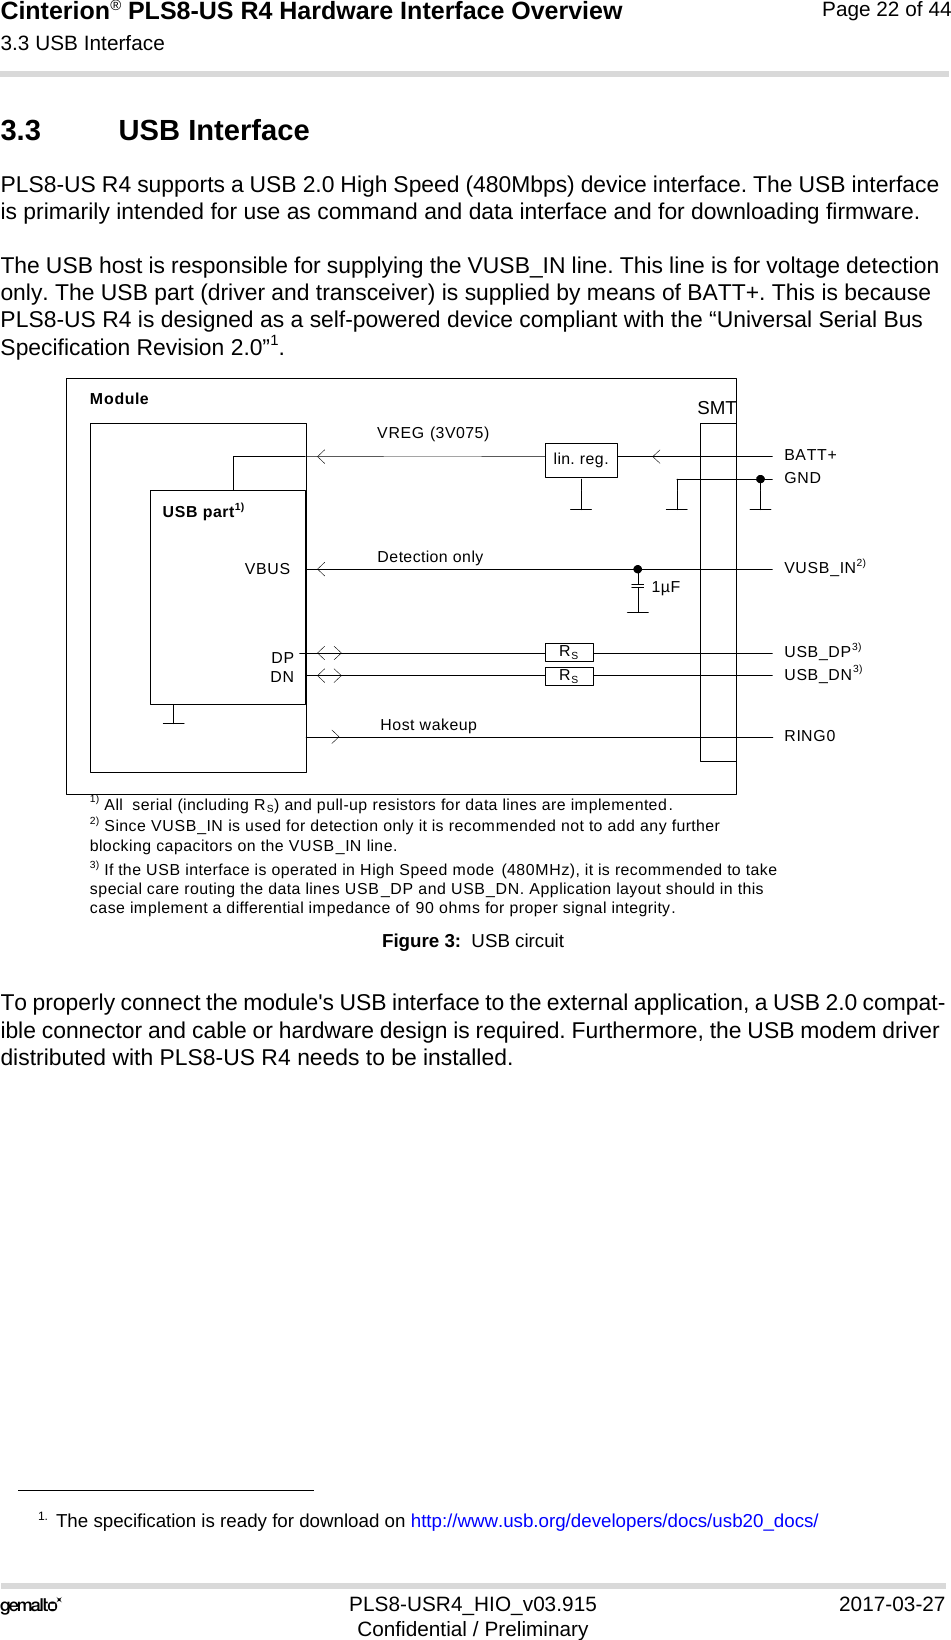 Cinterion® PLS8-US R4 Hardware Interface Overview3.3 USB Interface27PLS8-USR4_HIO_v03.915 2017-03-27Confidential / PreliminaryPage 22 of 443.3 USB InterfacePLS8-US R4 supports a USB 2.0 High Speed (480Mbps) device interface. The USB interface is primarily intended for use as command and data interface and for downloading firmware. The USB host is responsible for supplying the VUSB_IN line. This line is for voltage detection only. The USB part (driver and transceiver) is supplied by means of BATT+. This is because PLS8-US R4 is designed as a self-powered device compliant with the “Universal Serial Bus Specification Revision 2.0”1.Figure 3:  USB circuitTo properly connect the module&apos;s USB interface to the external application, a USB 2.0 compat-ible connector and cable or hardware design is required. Furthermore, the USB modem driver distributed with PLS8-US R4 needs to be installed.1. The specification is ready for download on http://www.usb.org/developers/docs/usb20_docs/DPDNVREG (3V075)BATT+USB_DP3)lin. reg. GNDModuleDetection only VUSB_IN2)USB part1)1) All  serial (including RS) and pull-up resistors for data lines are implemented.USB_DN3)3) If the USB interface is operated in High Speed mode  (480MHz), it is recommended to take special care routing the data lines USB_DP and USB_DN. Application layout should in this case implement a differential impedance of 90 ohms for proper signal integrity.RSRSVBUS 1µF2) Since VUSB_IN is used for detection only it is recommended not to add any further blocking capacitors on the VUSB_IN line.Host wakeup RING0SMT